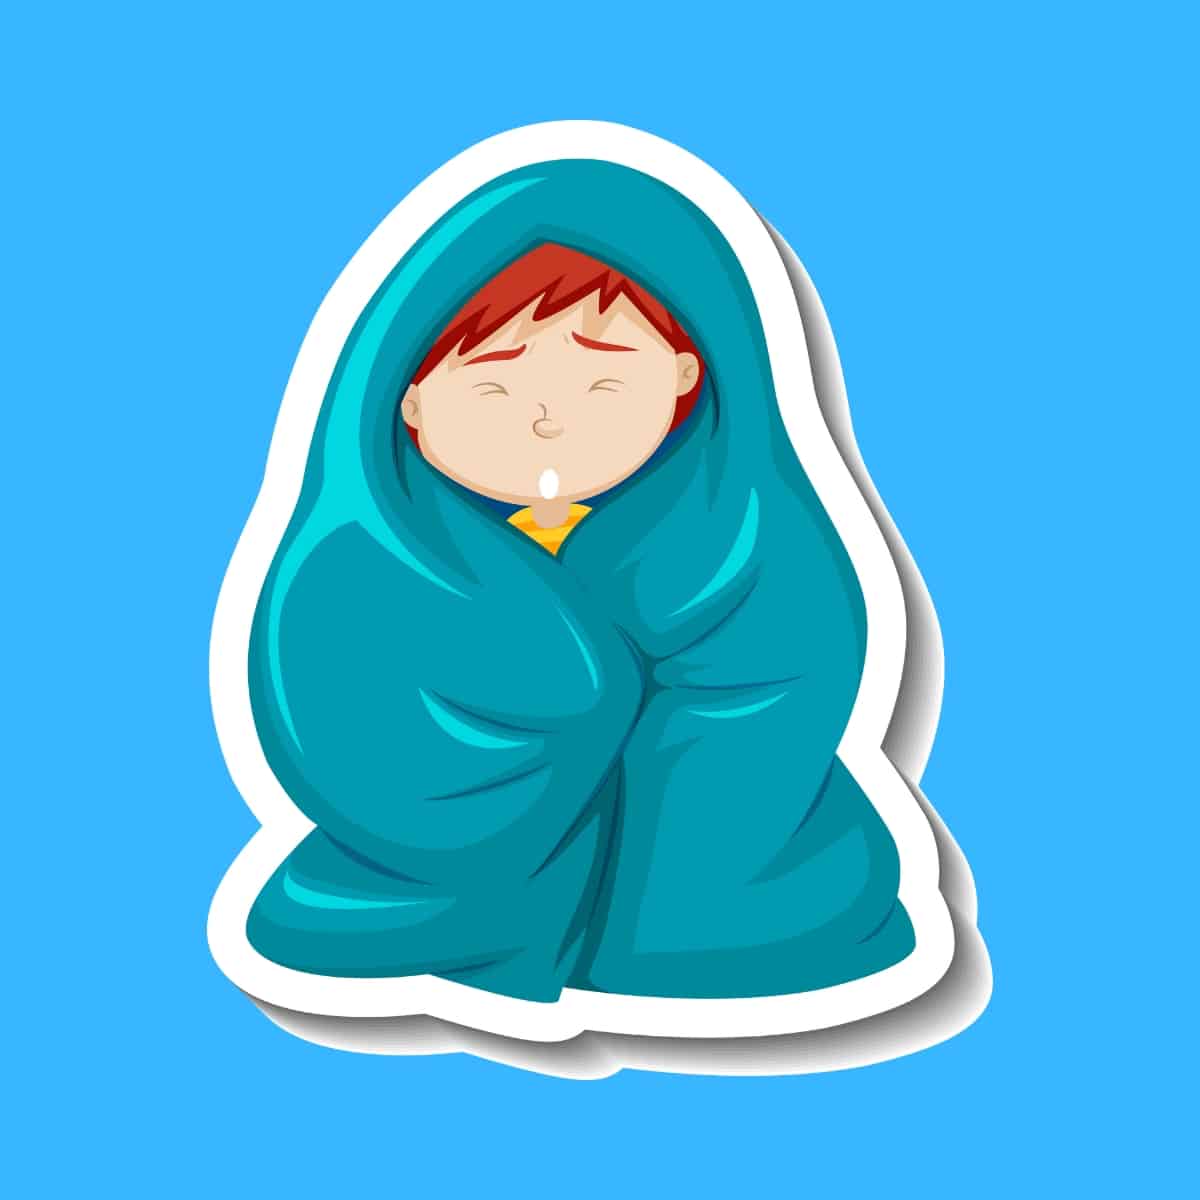 Cartoon graphic of a boy who looks cold and is wrapped up in a teal blanket on a blue background.